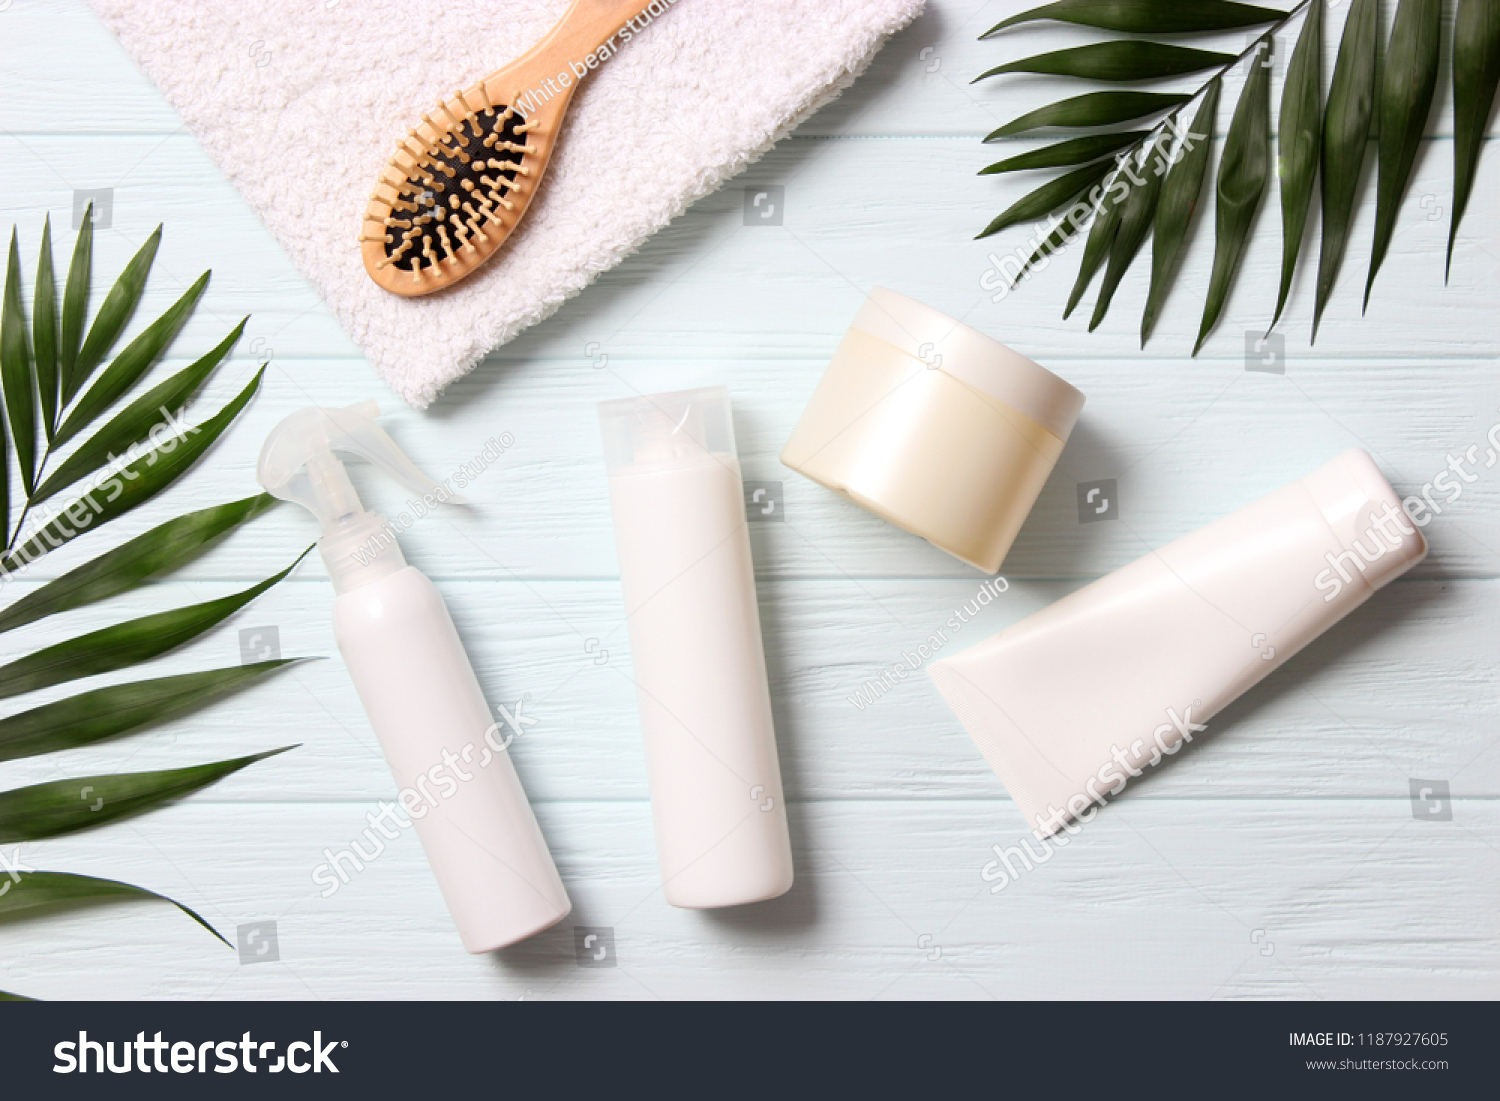 natural hair care products, hairbrush, towel and leaves on a wooden background top view. Shampoo, mask, balm. flatlay #1187927605